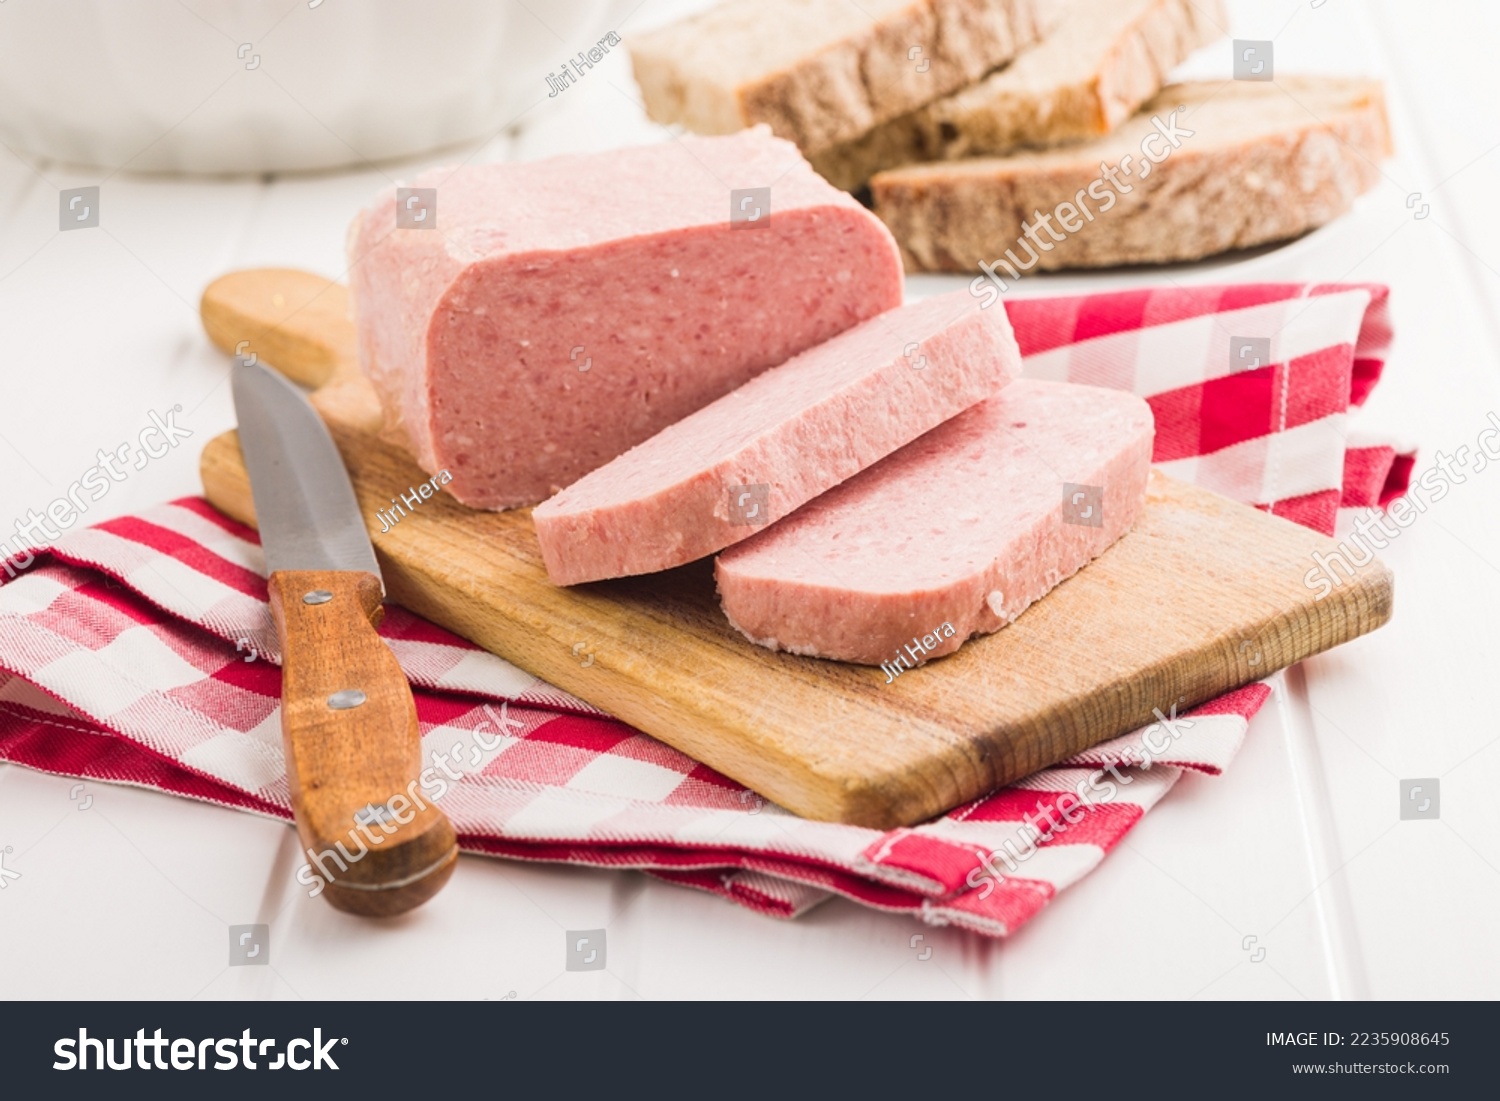 Luncheon meat on the cutting board. #2235908645